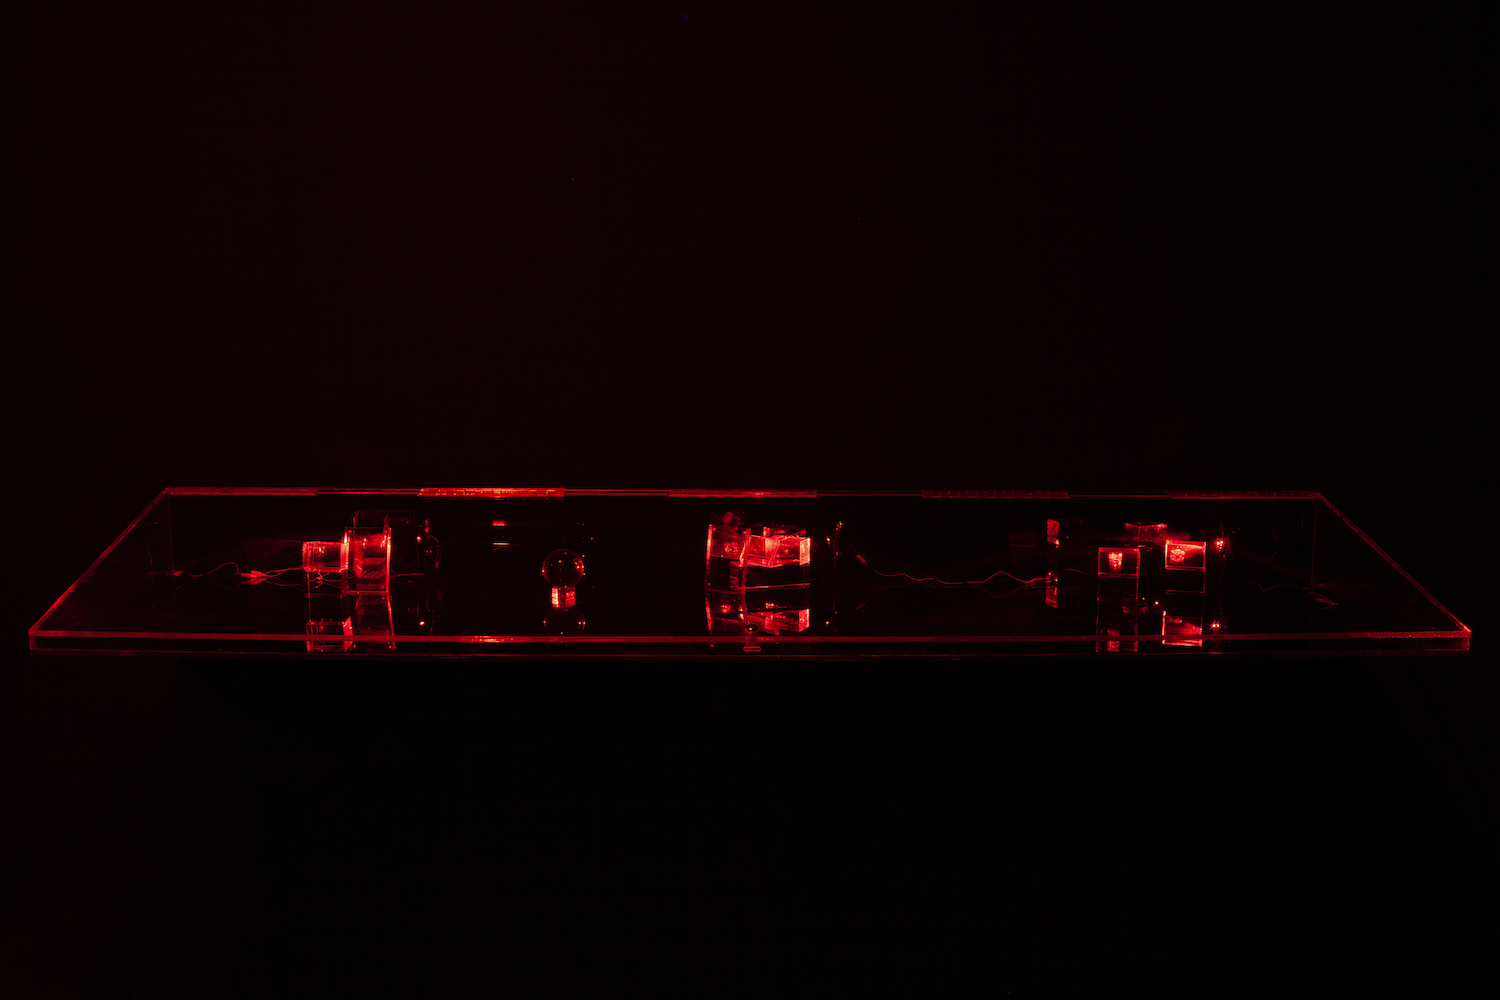 Constantina Zavitsanos, *Boxed Bet*, 2019. Transmission holograms, acrylic mounts, 5mW red laser. Installation view

[image description: A clear plexiglass display case is mounted on a black wall in the dark. Laser light glows from the display case. Its closed clear lid and sides slope down from back to front. Inside the case are three separate arrangements of holograms on dimensional clear acrylic mounts, as well as a single glass sphere, each lit by a red laser.]